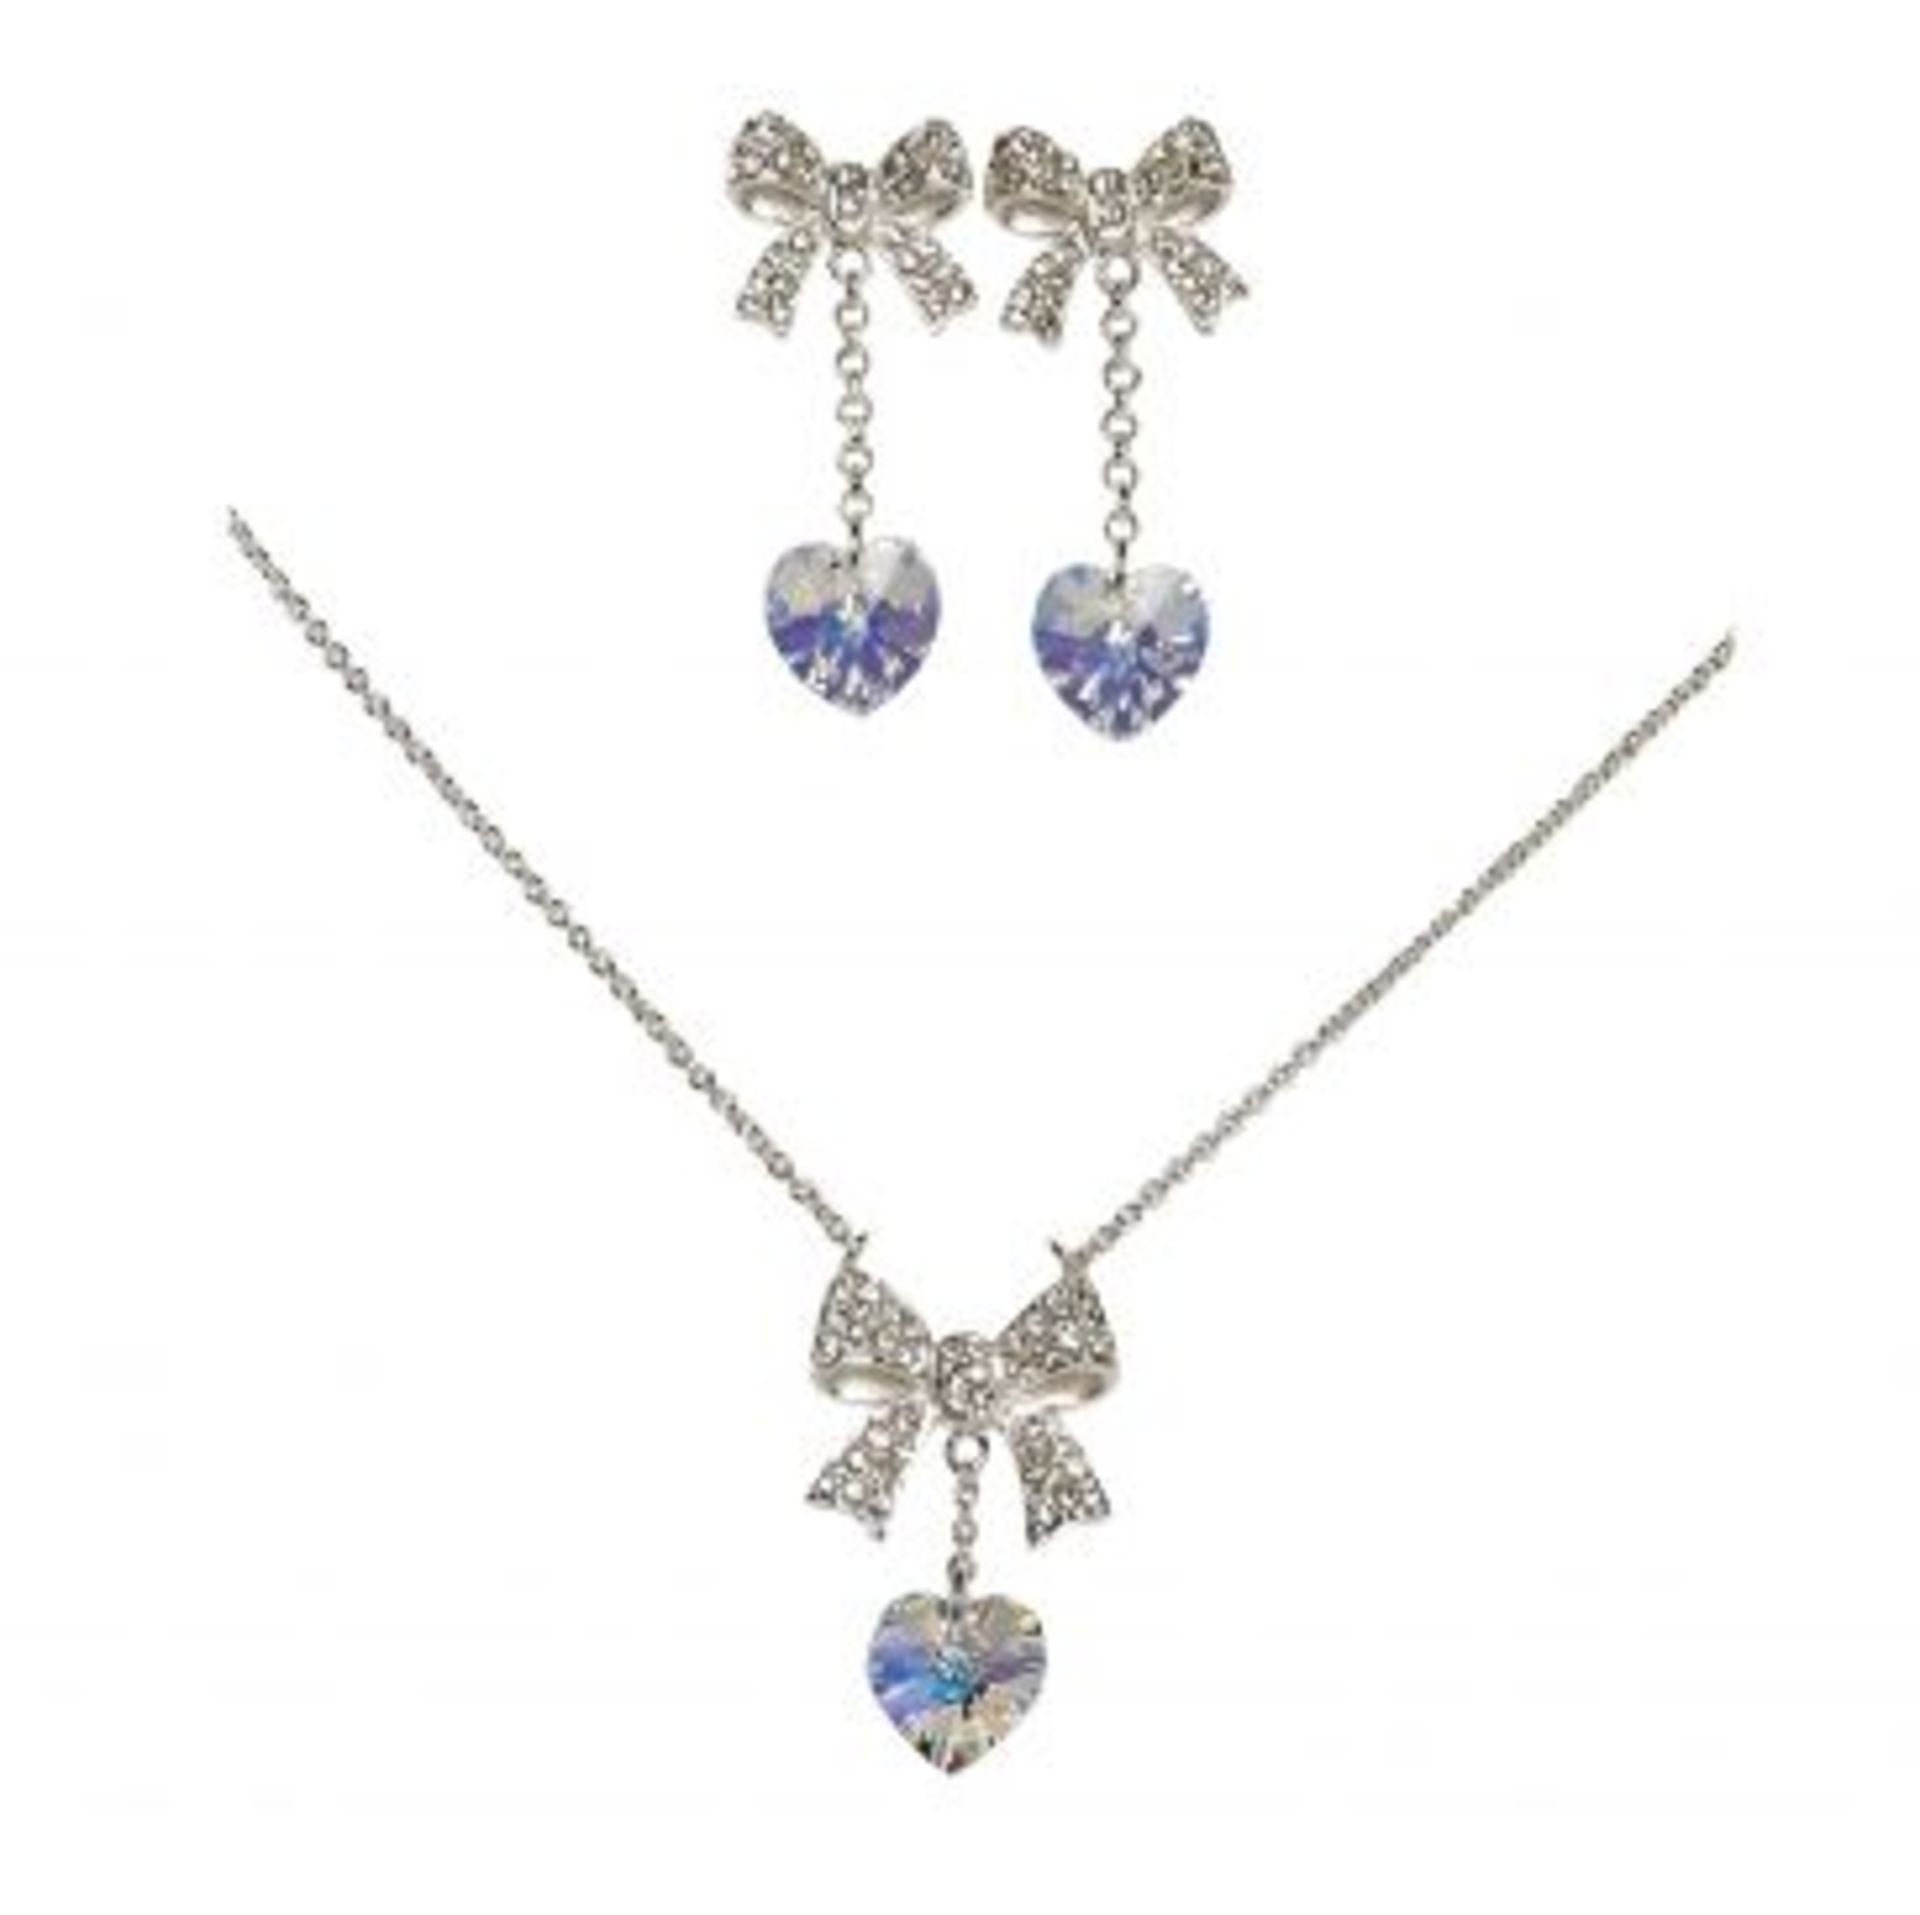 5 x HEART PENDANT AND EARRING SETS By ICE London - EGJ-9900 - Each Features A Silver-tone Curb Chain - Image 2 of 2